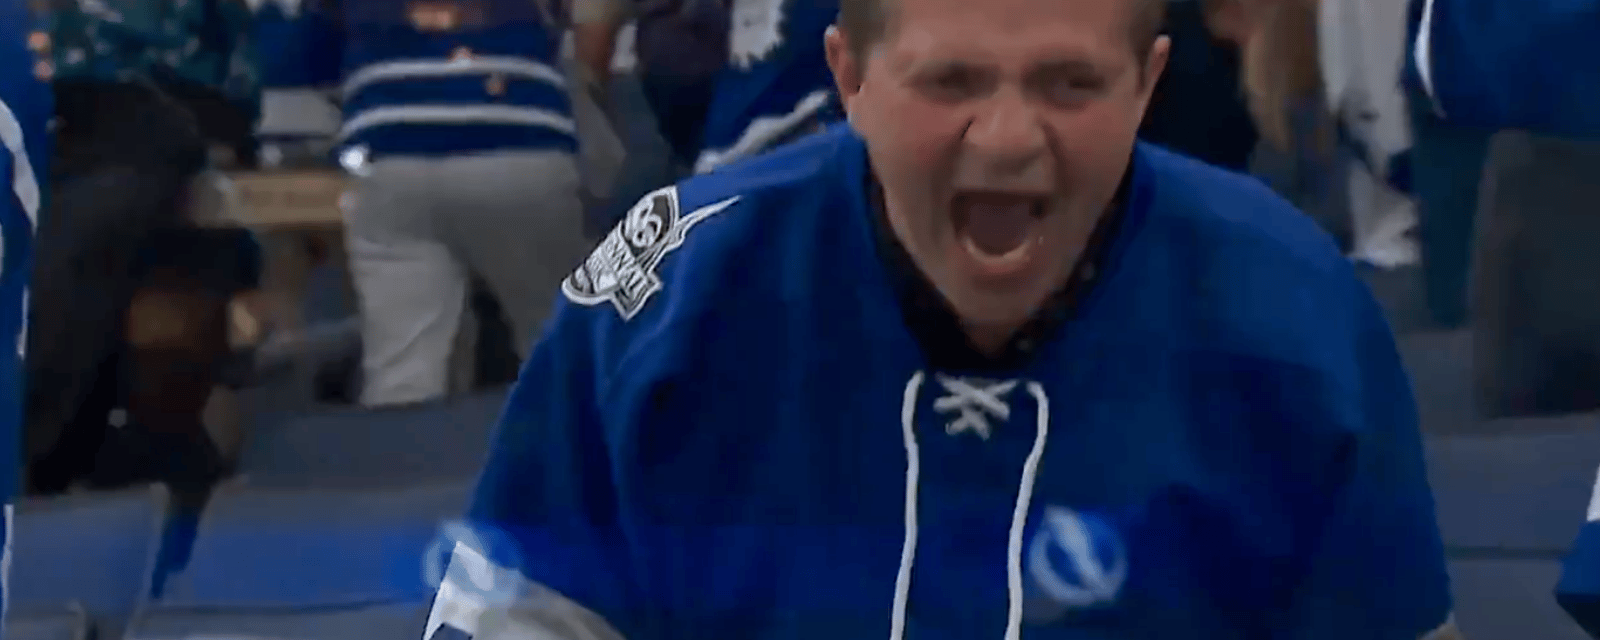 Maple Leafs fan goes viral for passionate reaction to OT win 